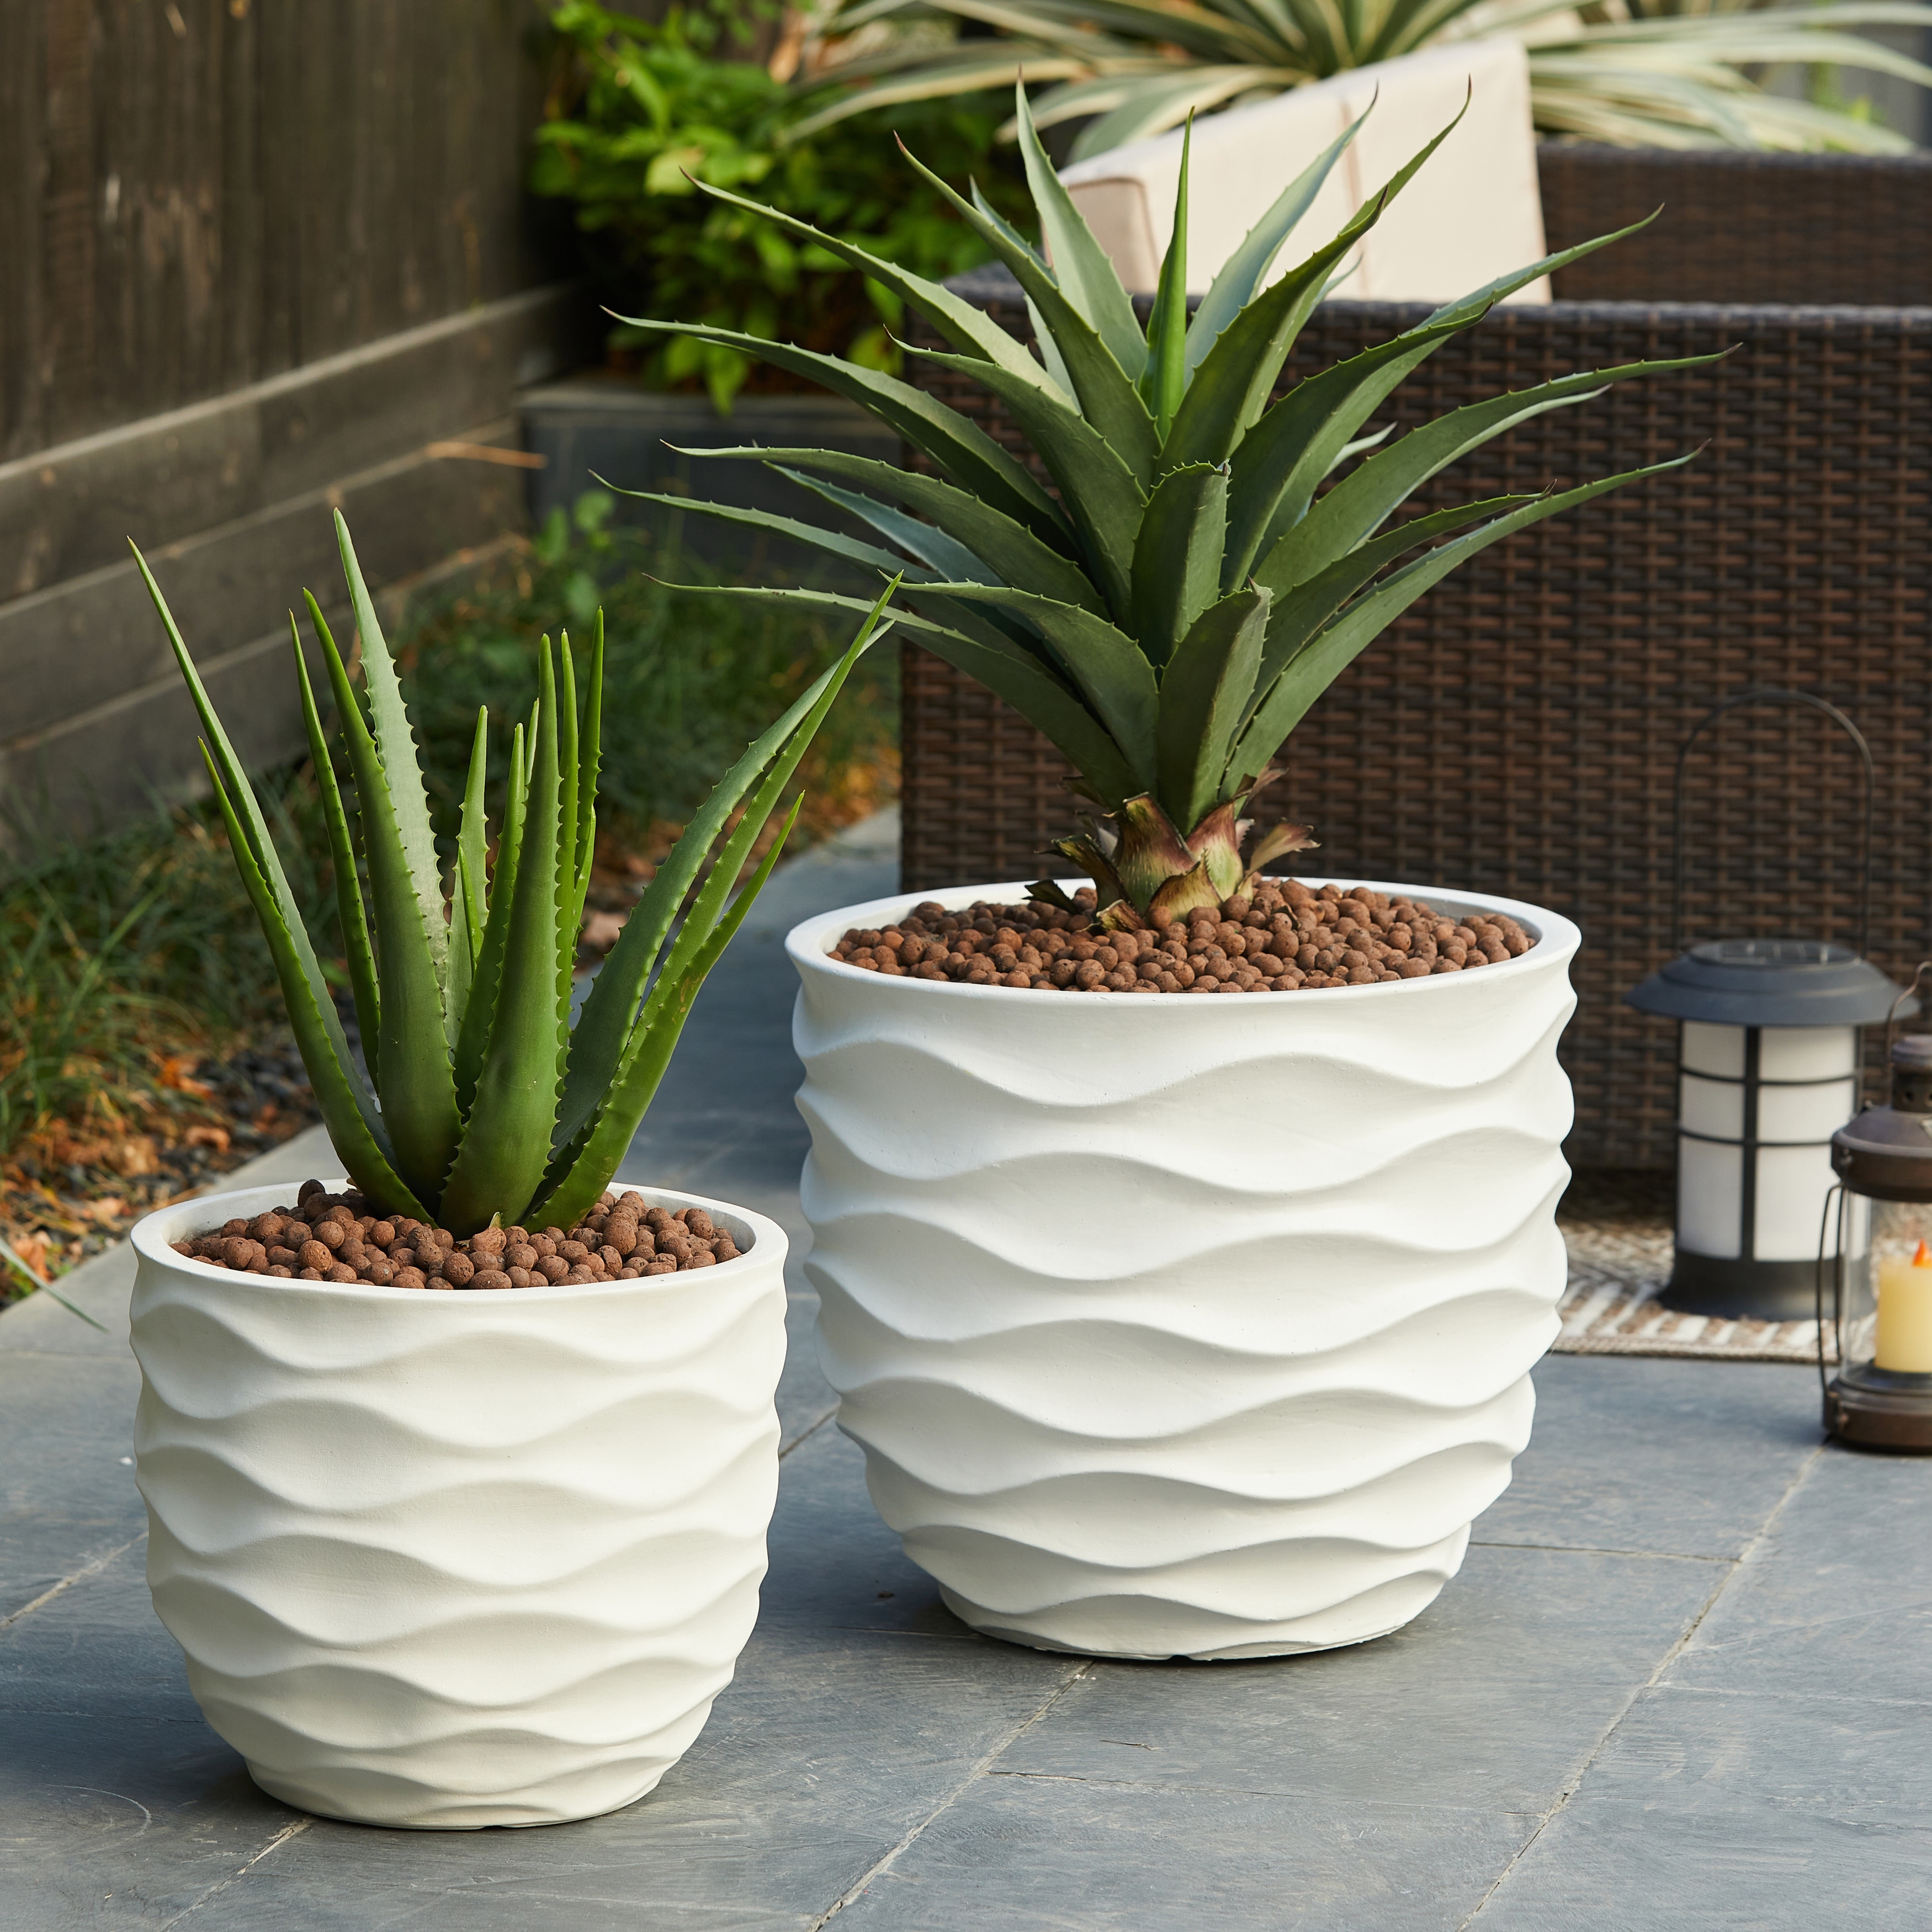 https://ak1.ostkcdn.com/images/products/is/images/direct/def420e911e69bb49418c0084c3fff440c409874/Kayu-2-piece-Wavy-Design-White-MgO-Planters-by-Havenside-Home.jpg